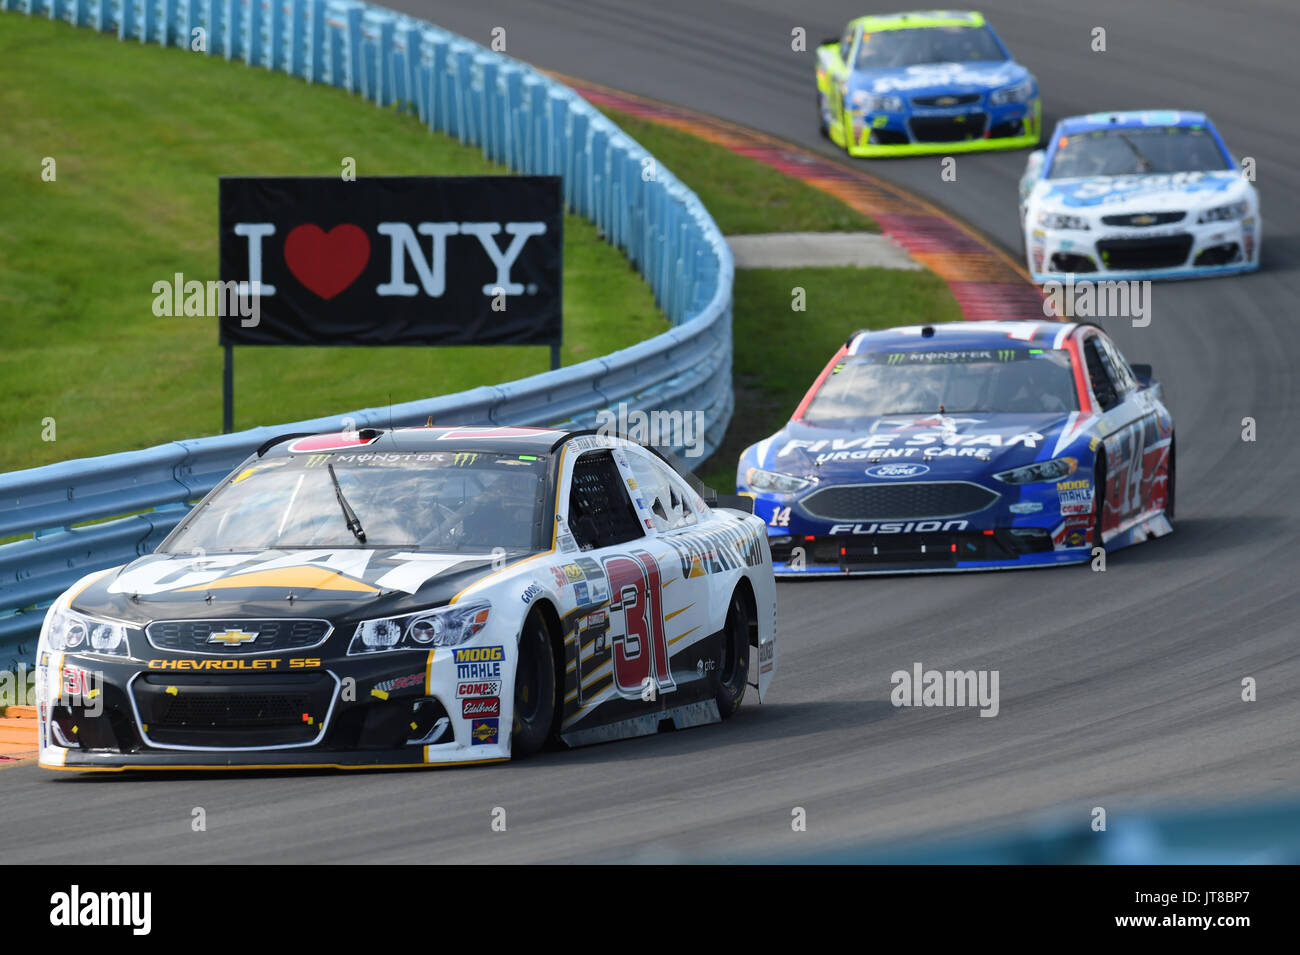 August 6, 2017: Monster Energy NASCAR Cup Series driver Ryan Newman #31  leads a group of cars during the Monster Energy NASCAR Cup Series I Love NY  355 at The Glen on